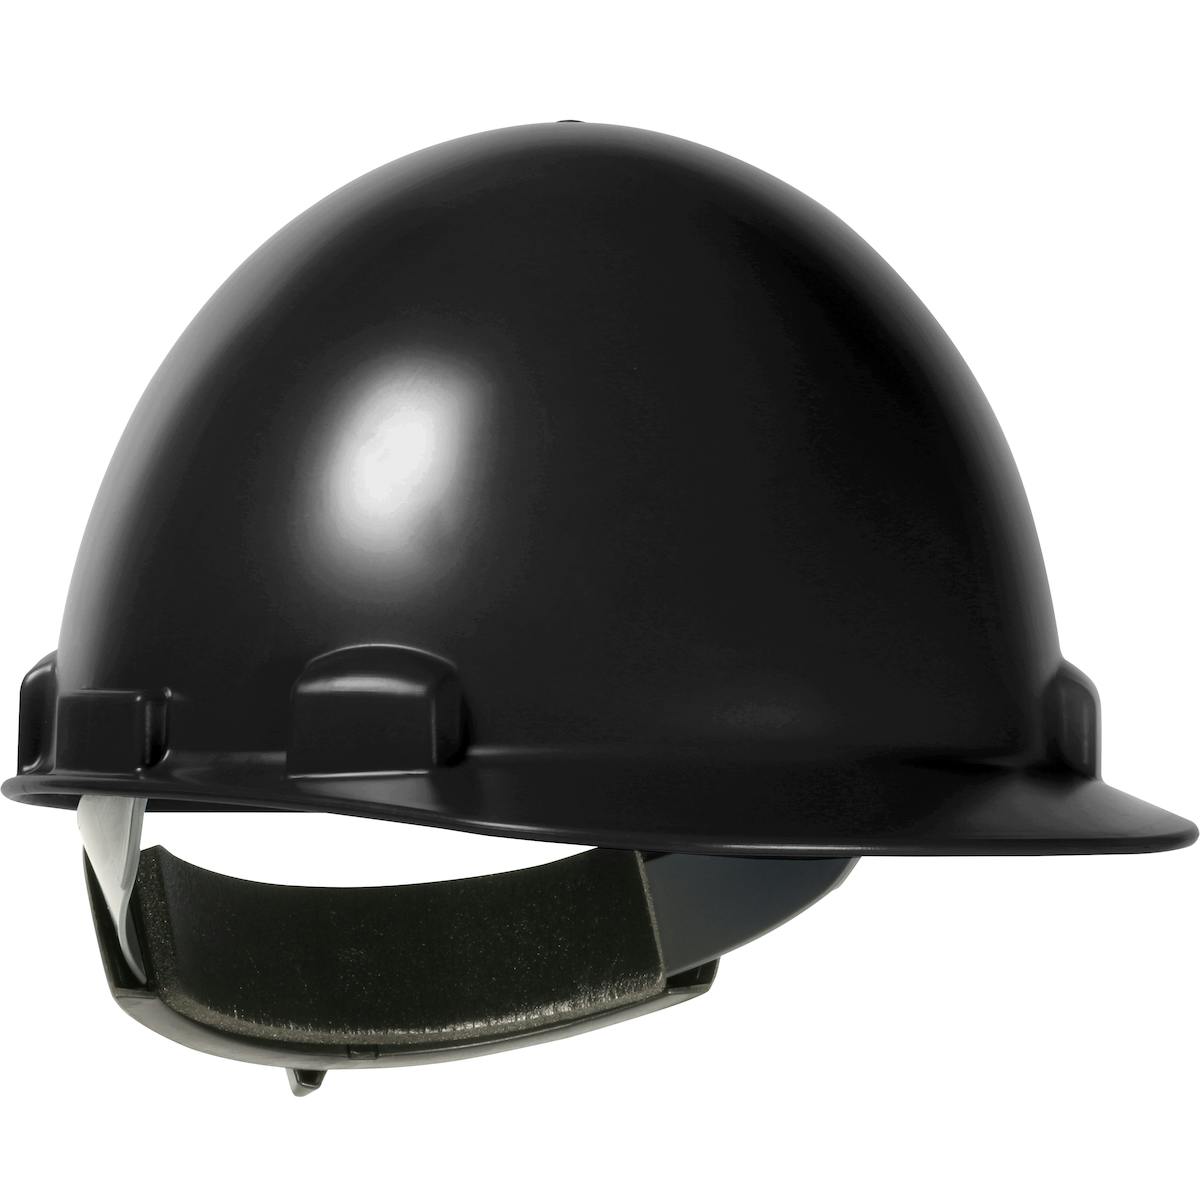 Stromboli™ Cap Style Smooth Dome Hard Hat with ABS/Polycarbonate Shell, 4-Point Textile Suspension and Swing Wheel-Ratchet Adjustment (280-HP841SR)_0